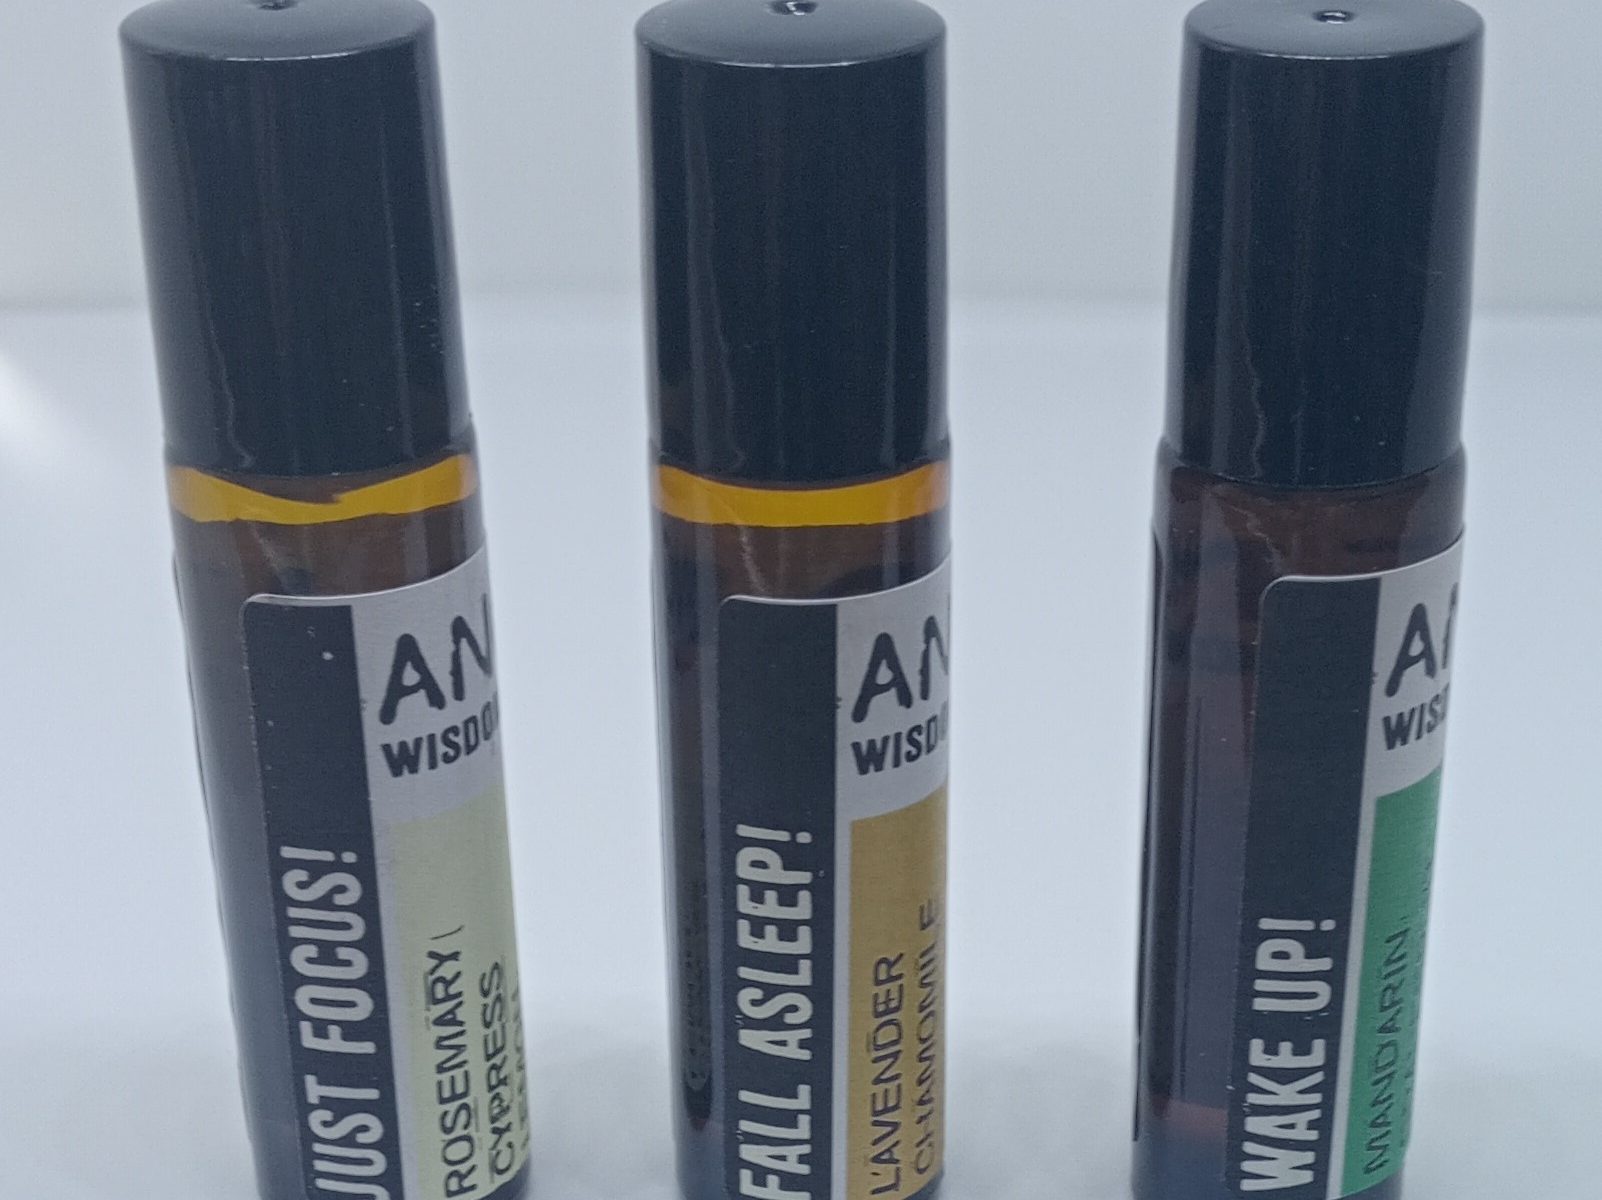 Aromatherapy Roll On Essential Oils